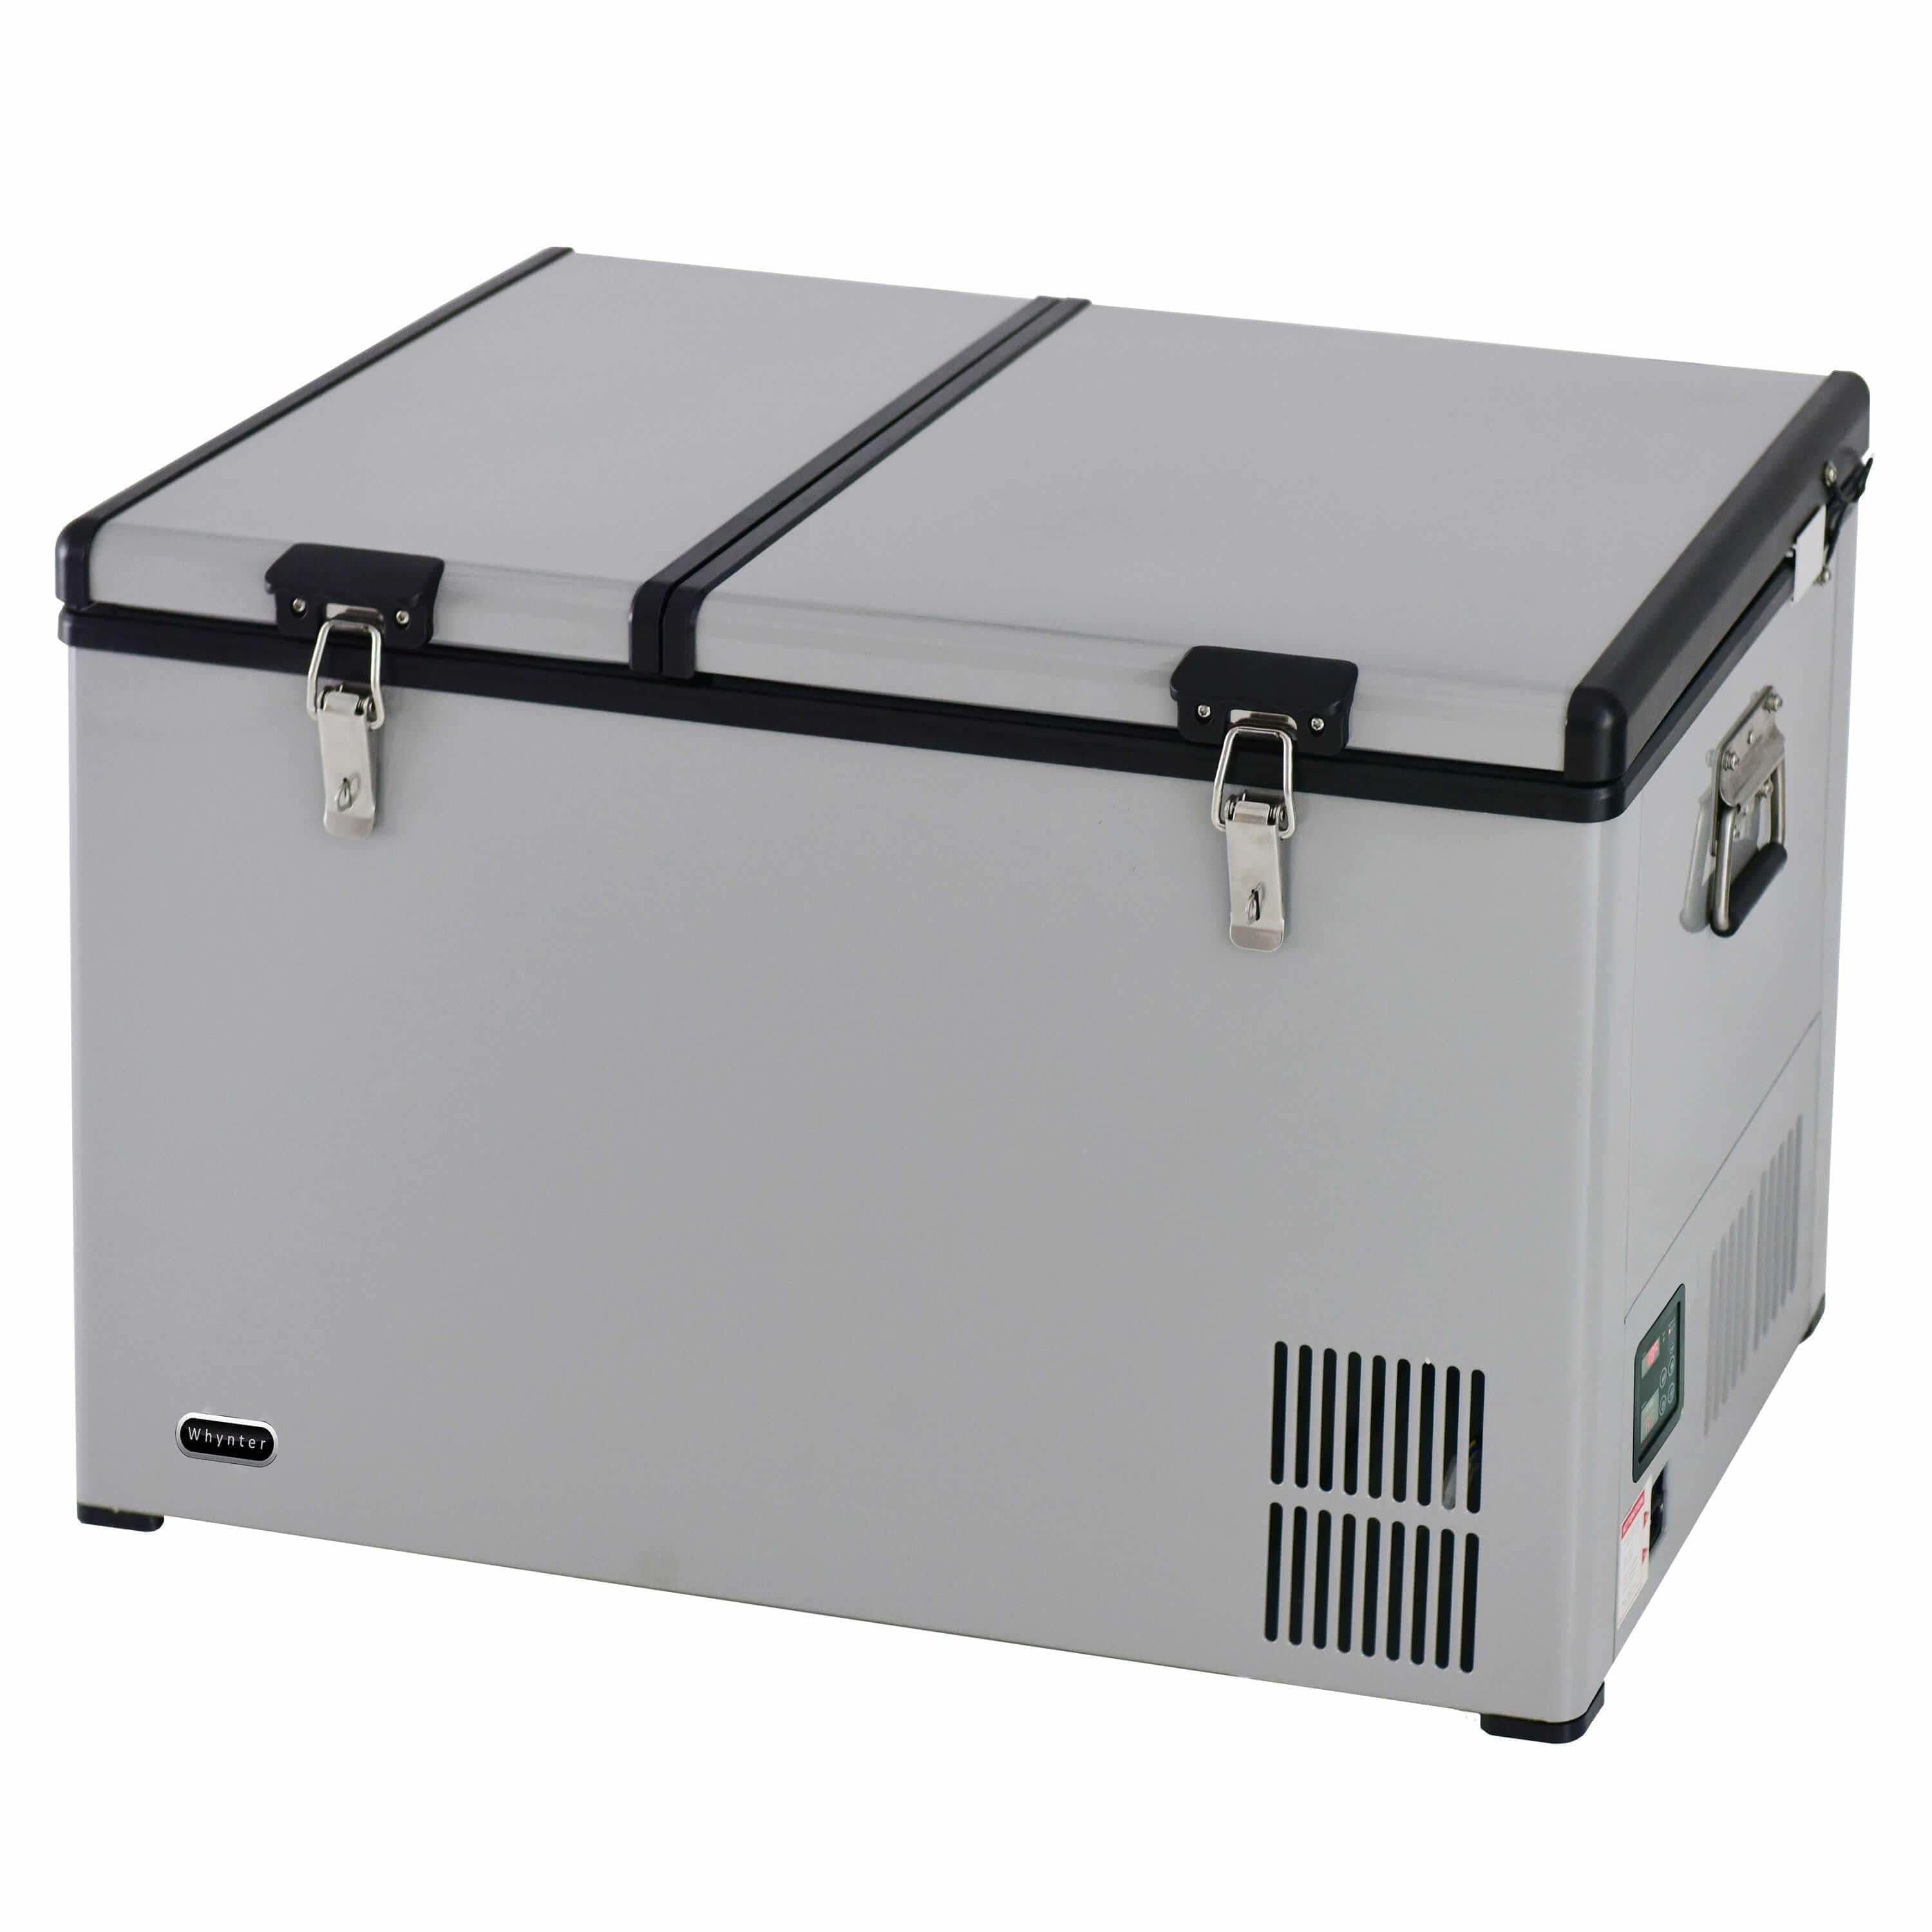 Whynter 90 Quart Dual Zone Portable Fridge/ Freezer with 12v Option and Wheels FM-901DZ Wine Coolers Empire